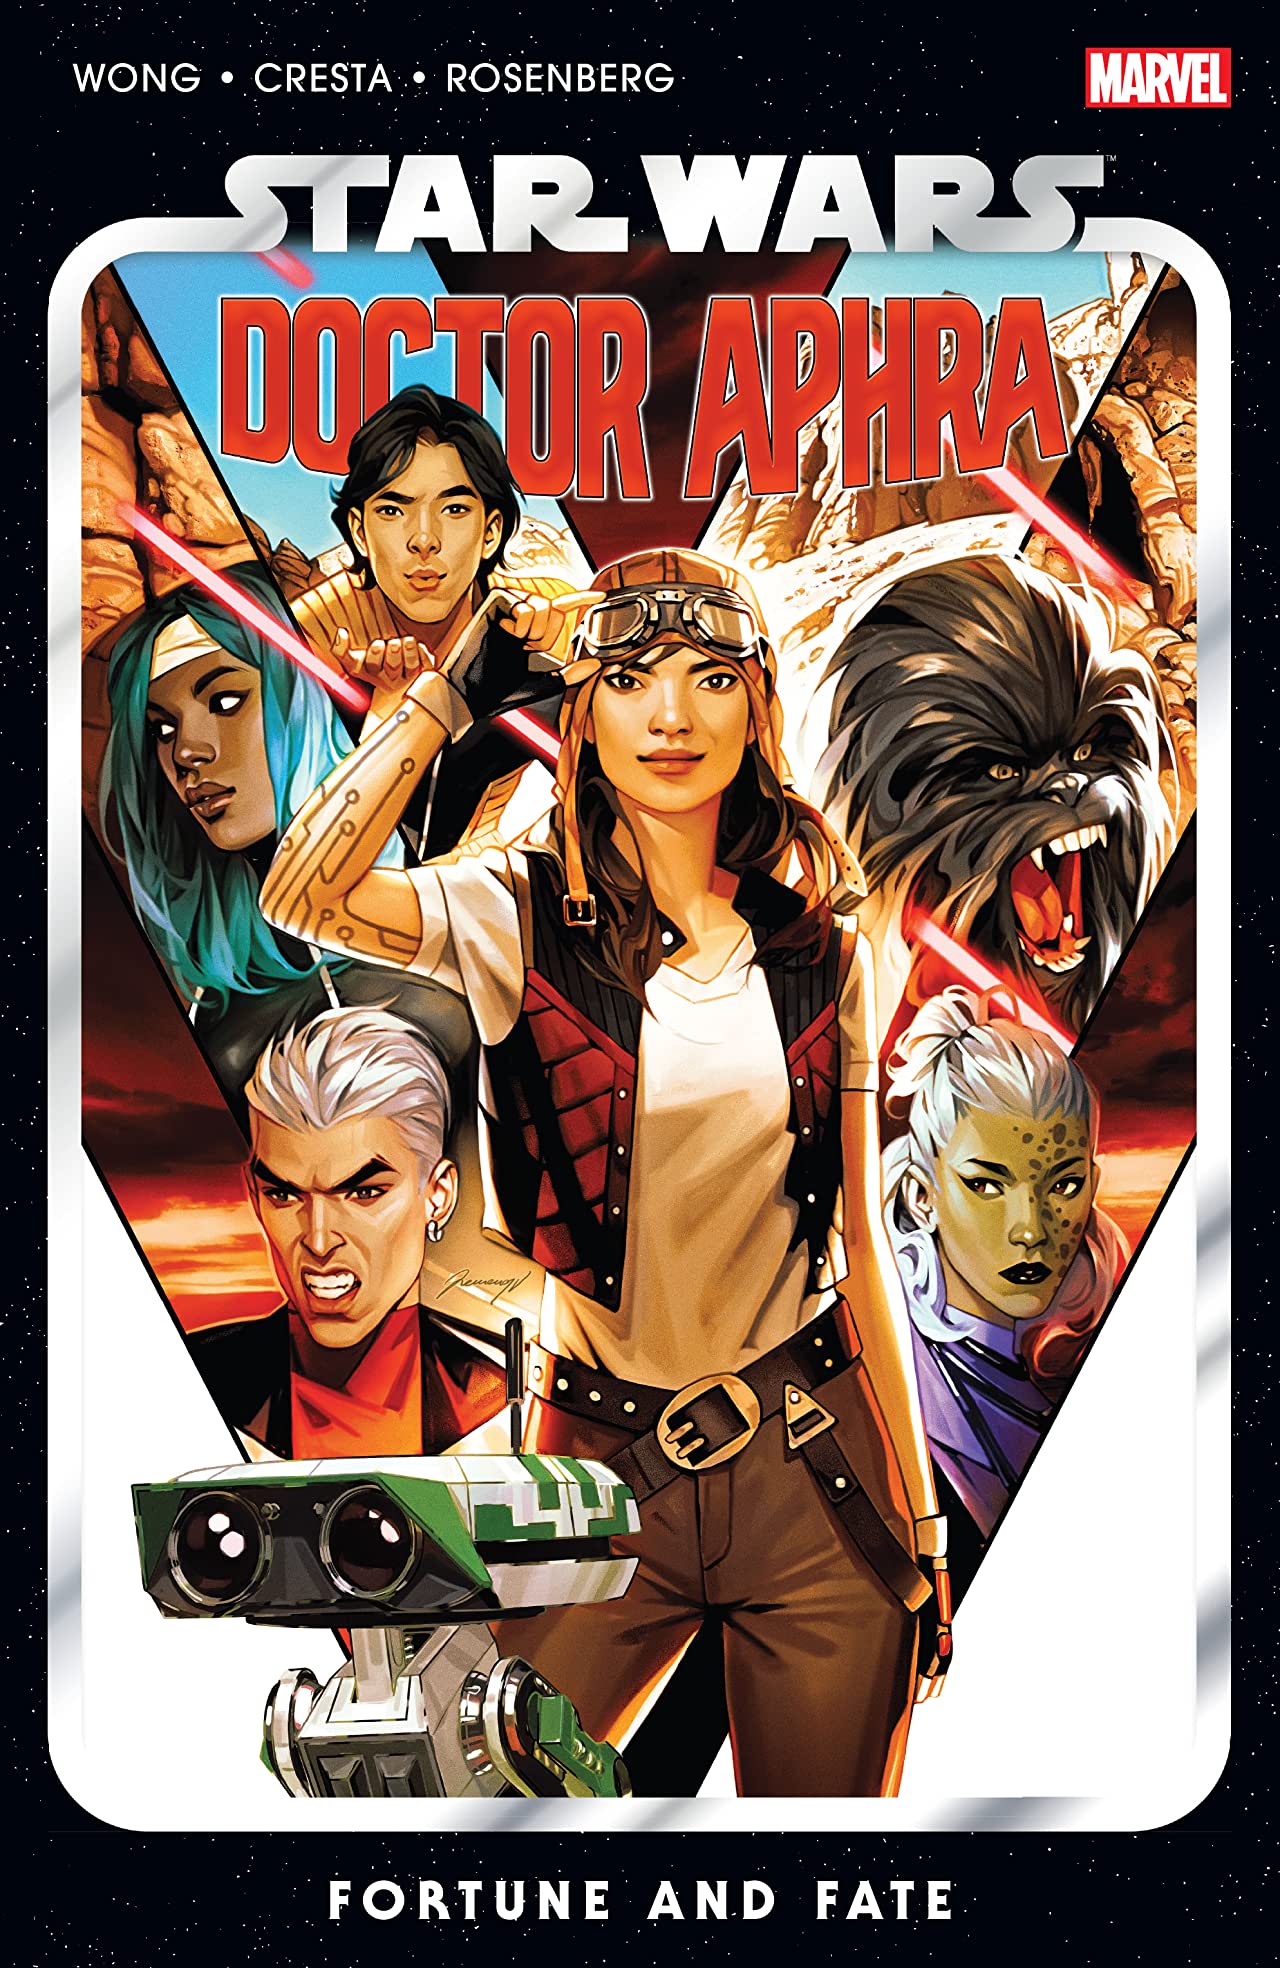 Star Wars: Doctor Aphra Graphic Novel Volume 1 Fortune And Fate